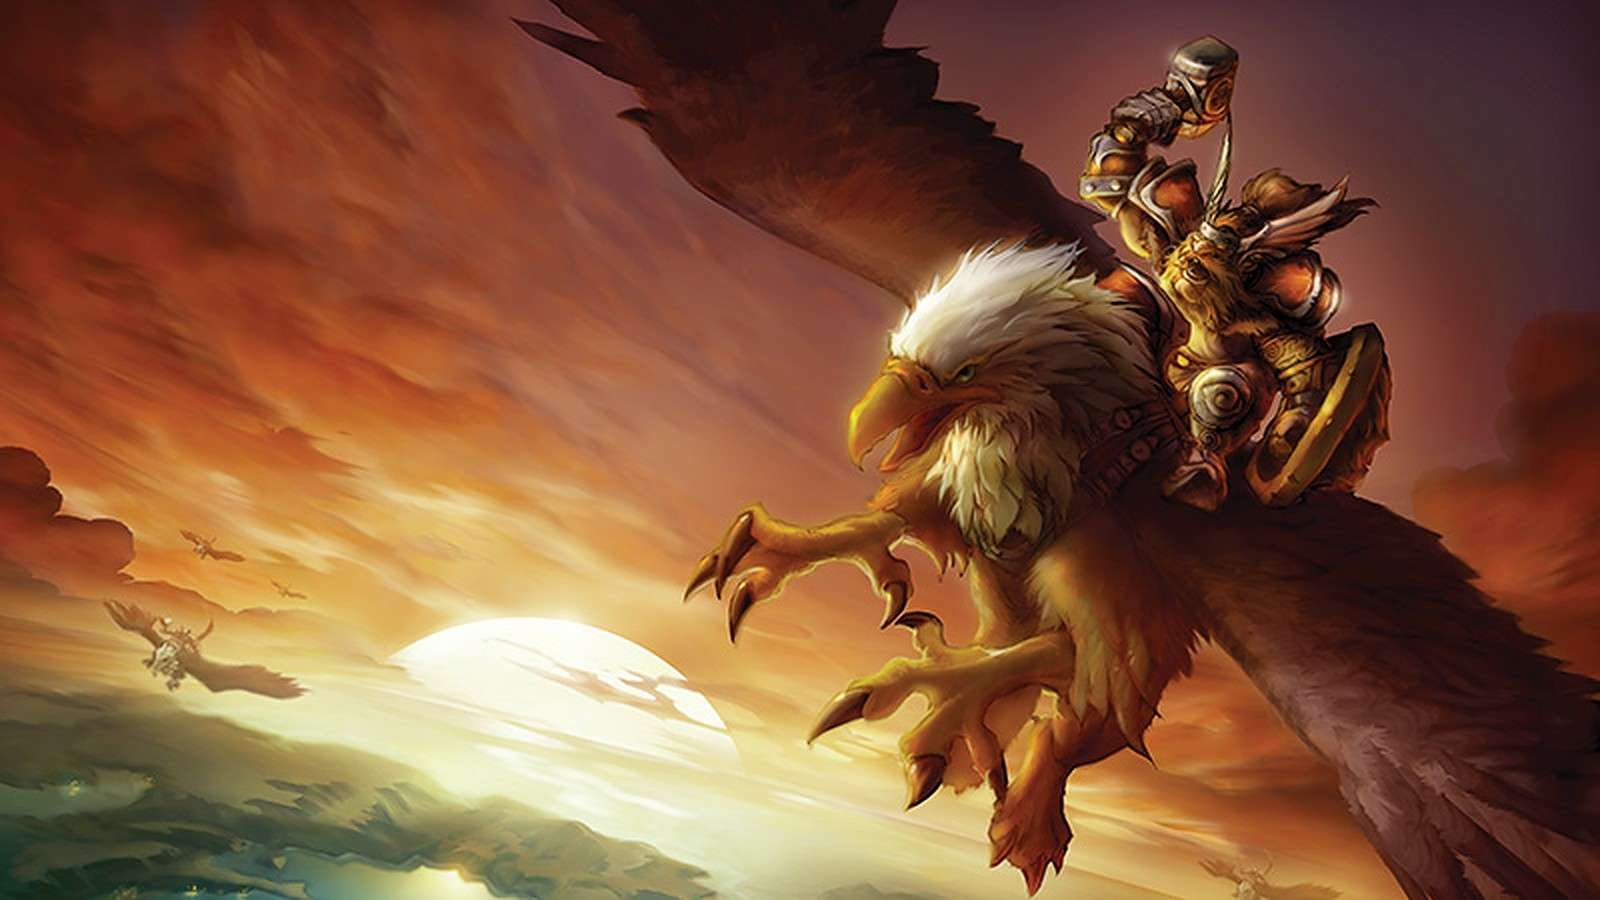 A Dwarf rides a Gryphon in Season of Discovery